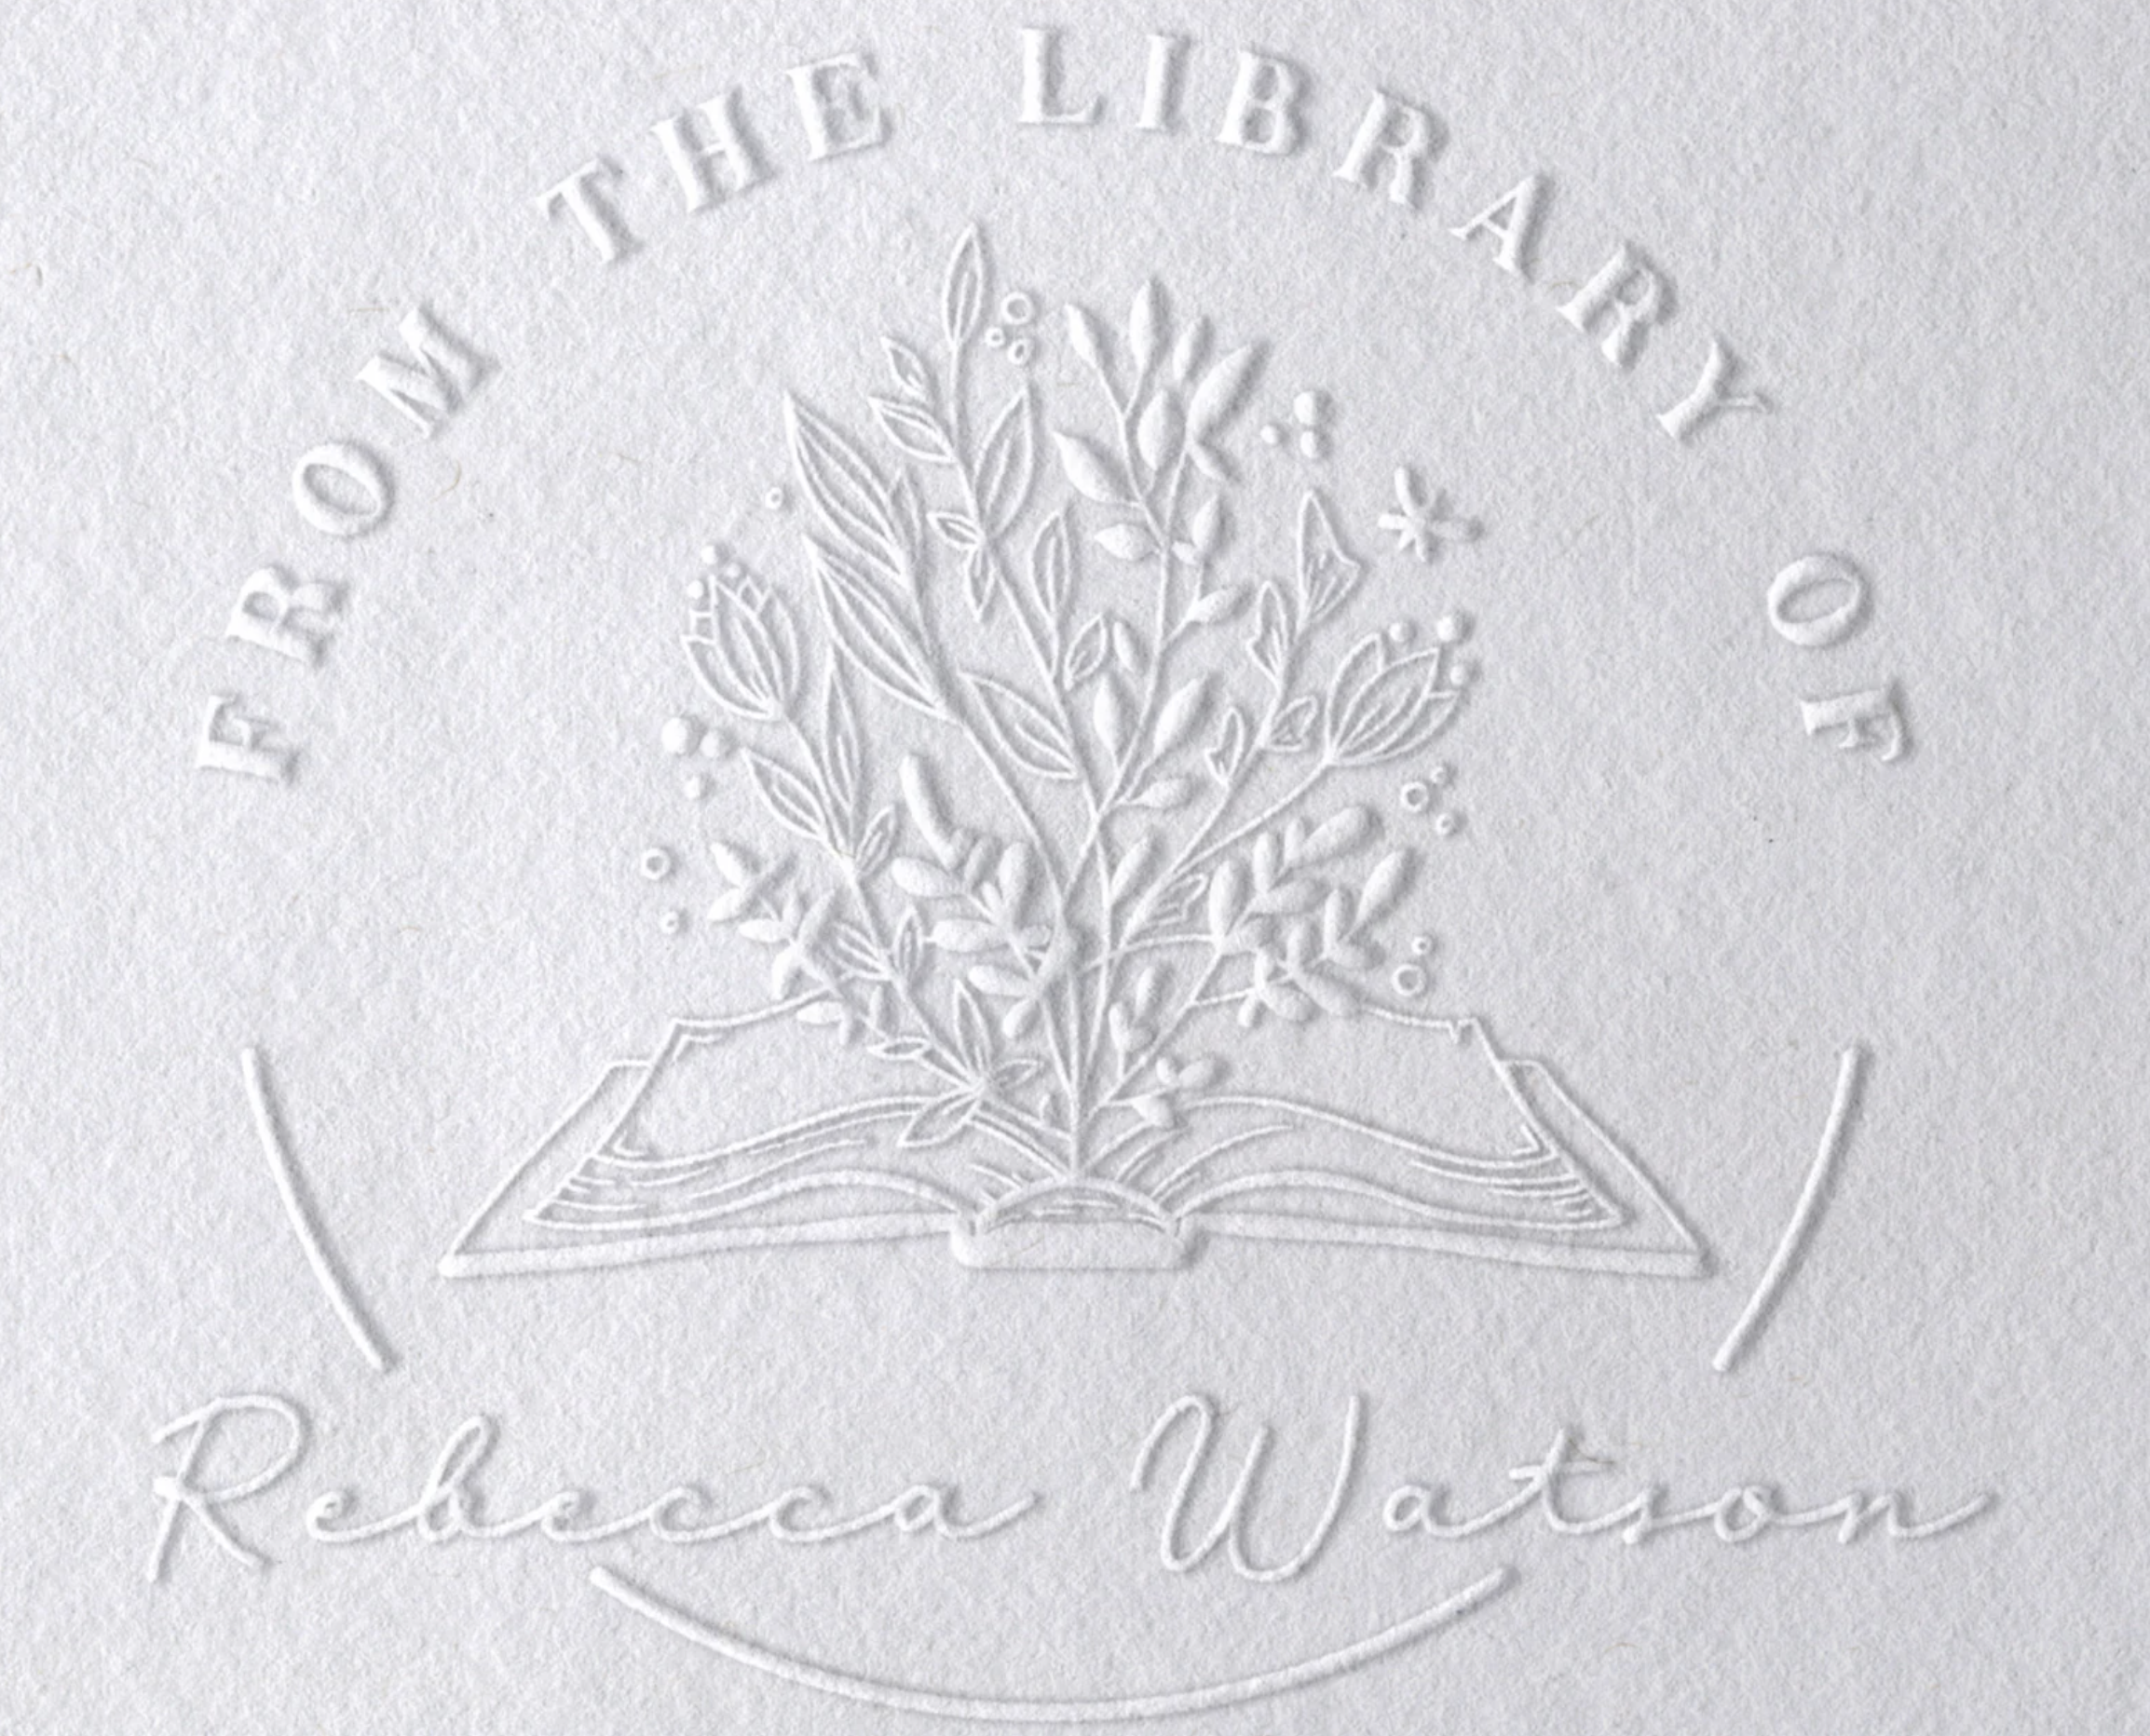 A white page with an embossed book and flowers. the text says "From the library of Rebecca Watson"